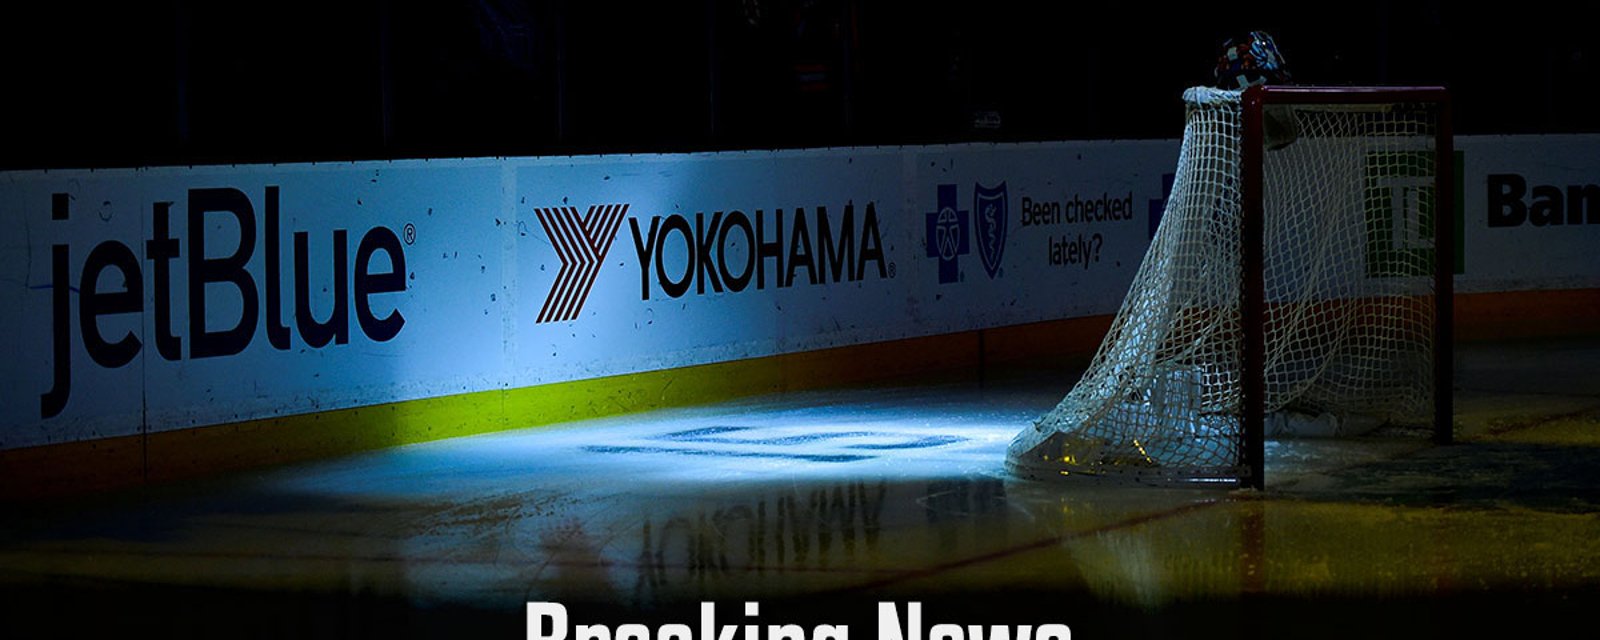 NHL team loses 3 goalies to injury, forced to put in undrafted rookie with 0 NHL experience.